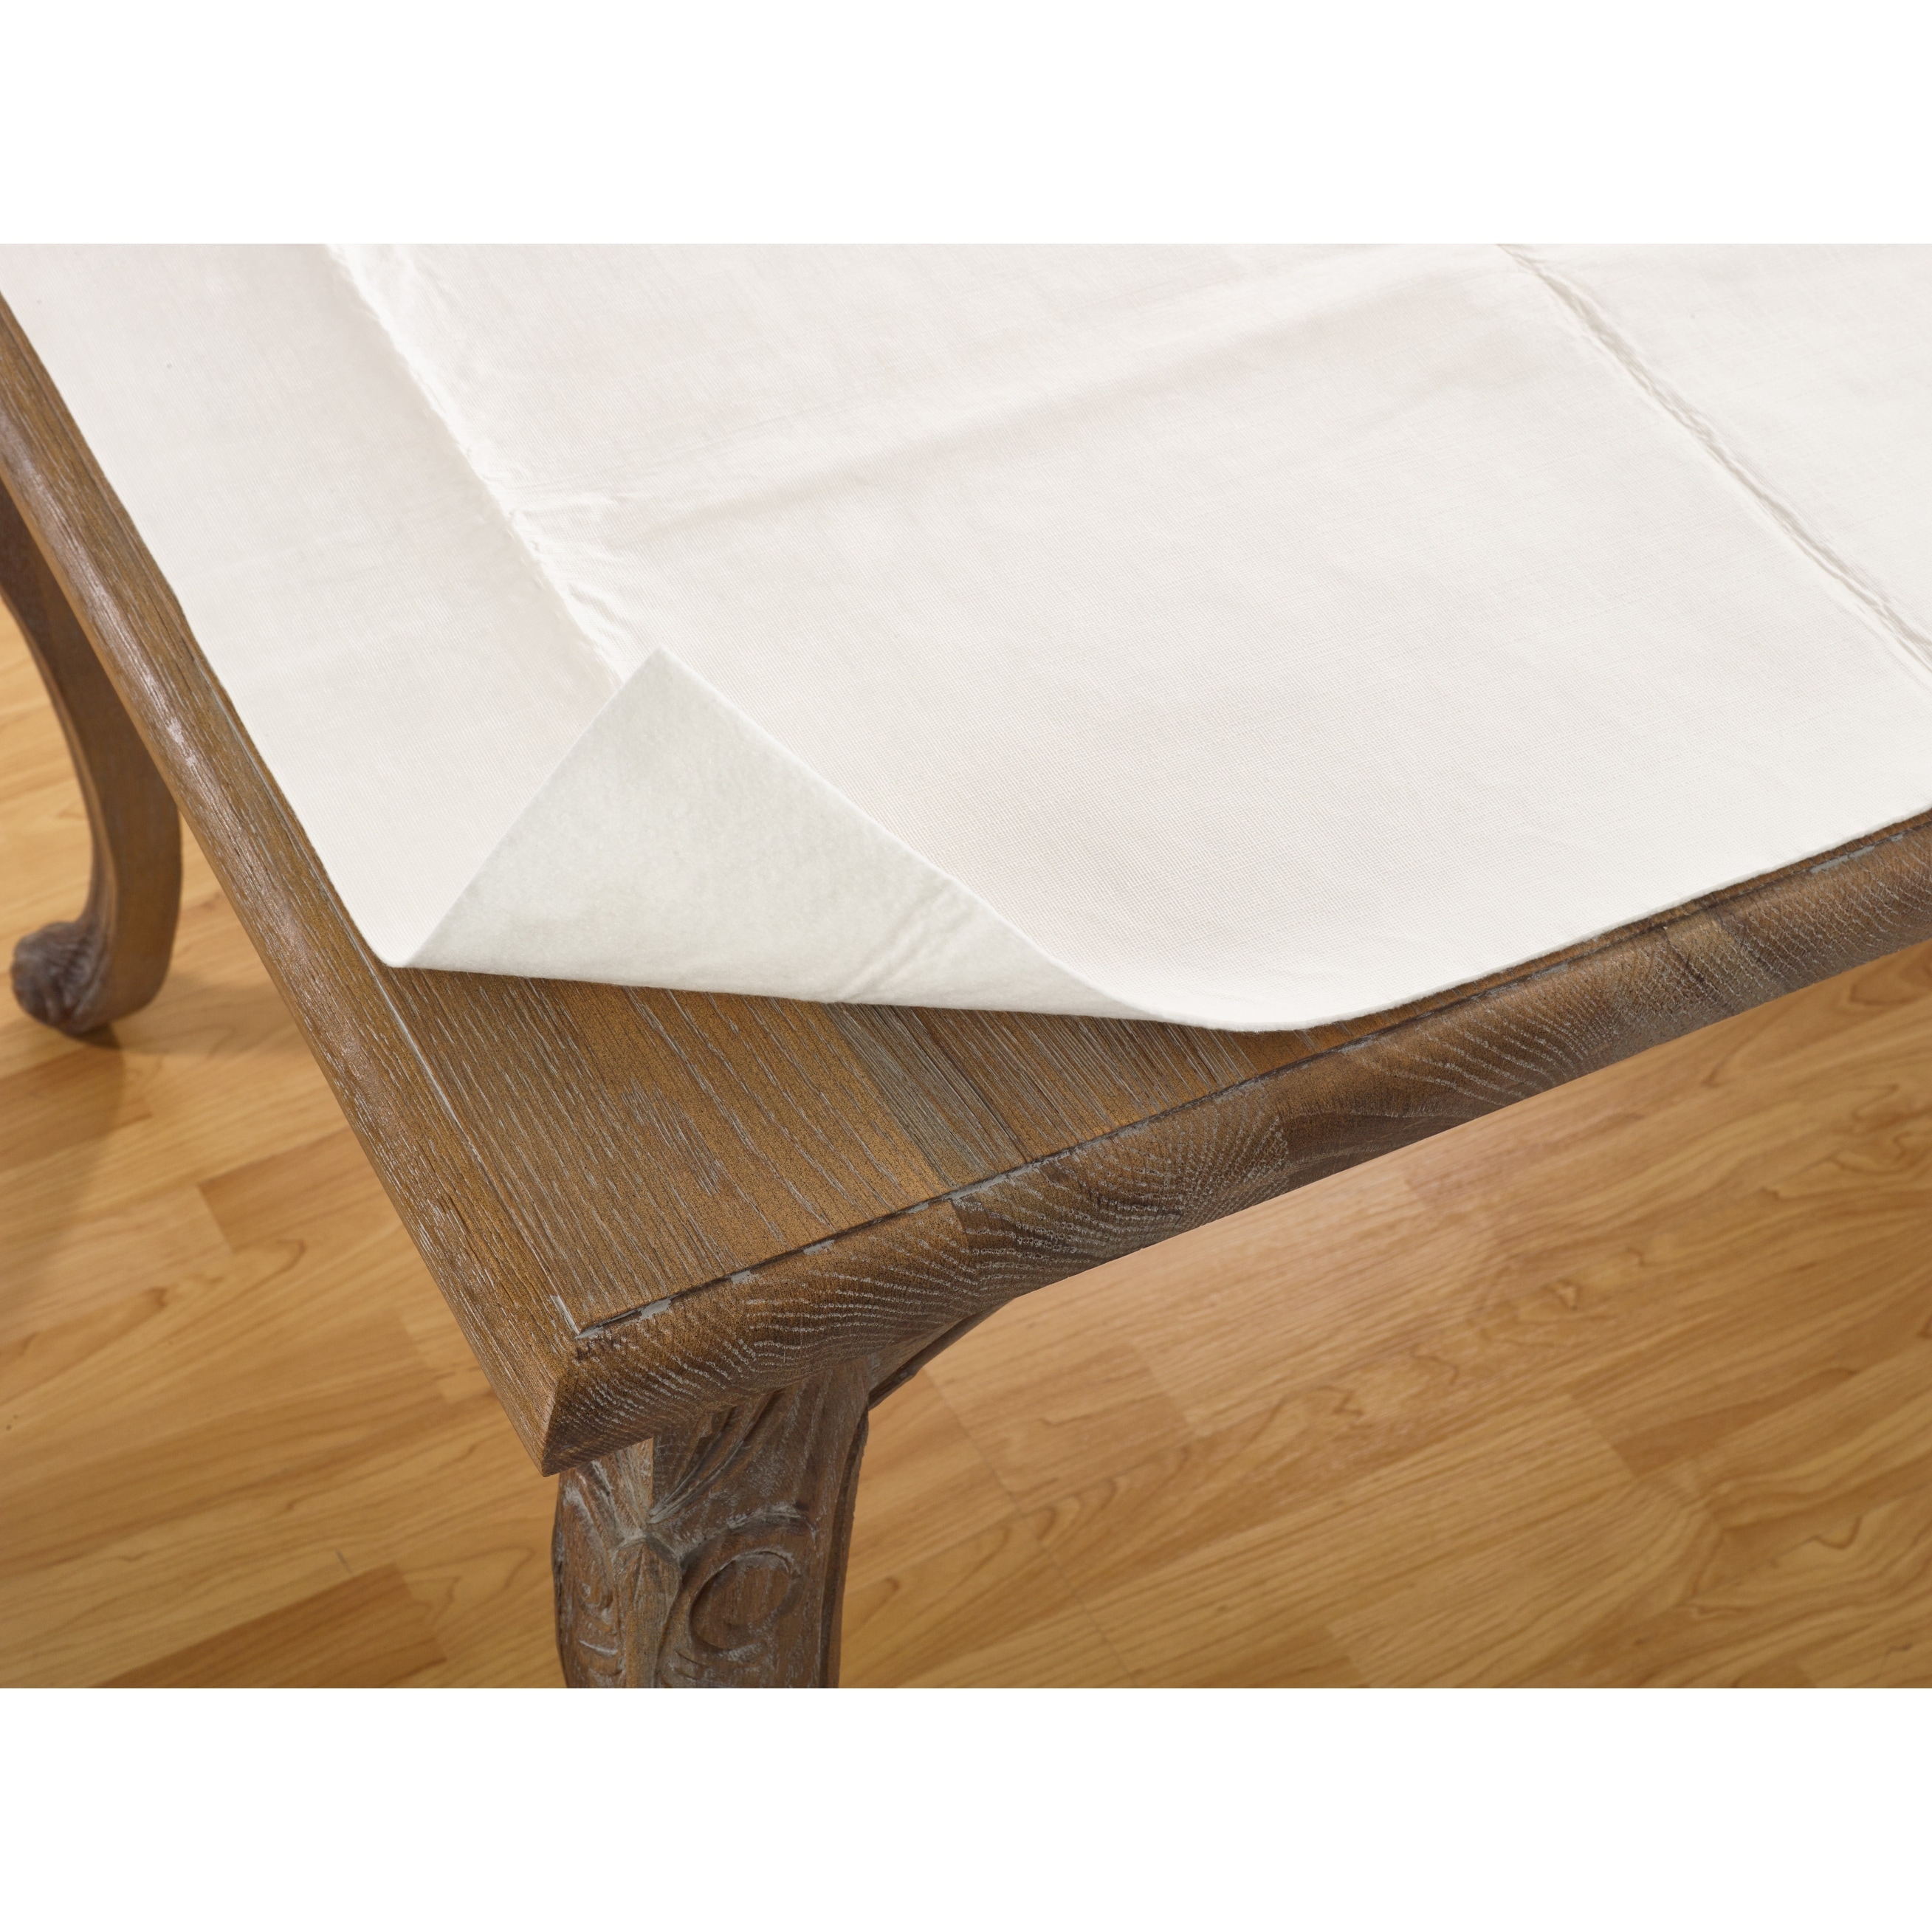 Cushioned Table Protector Pad - 52x120